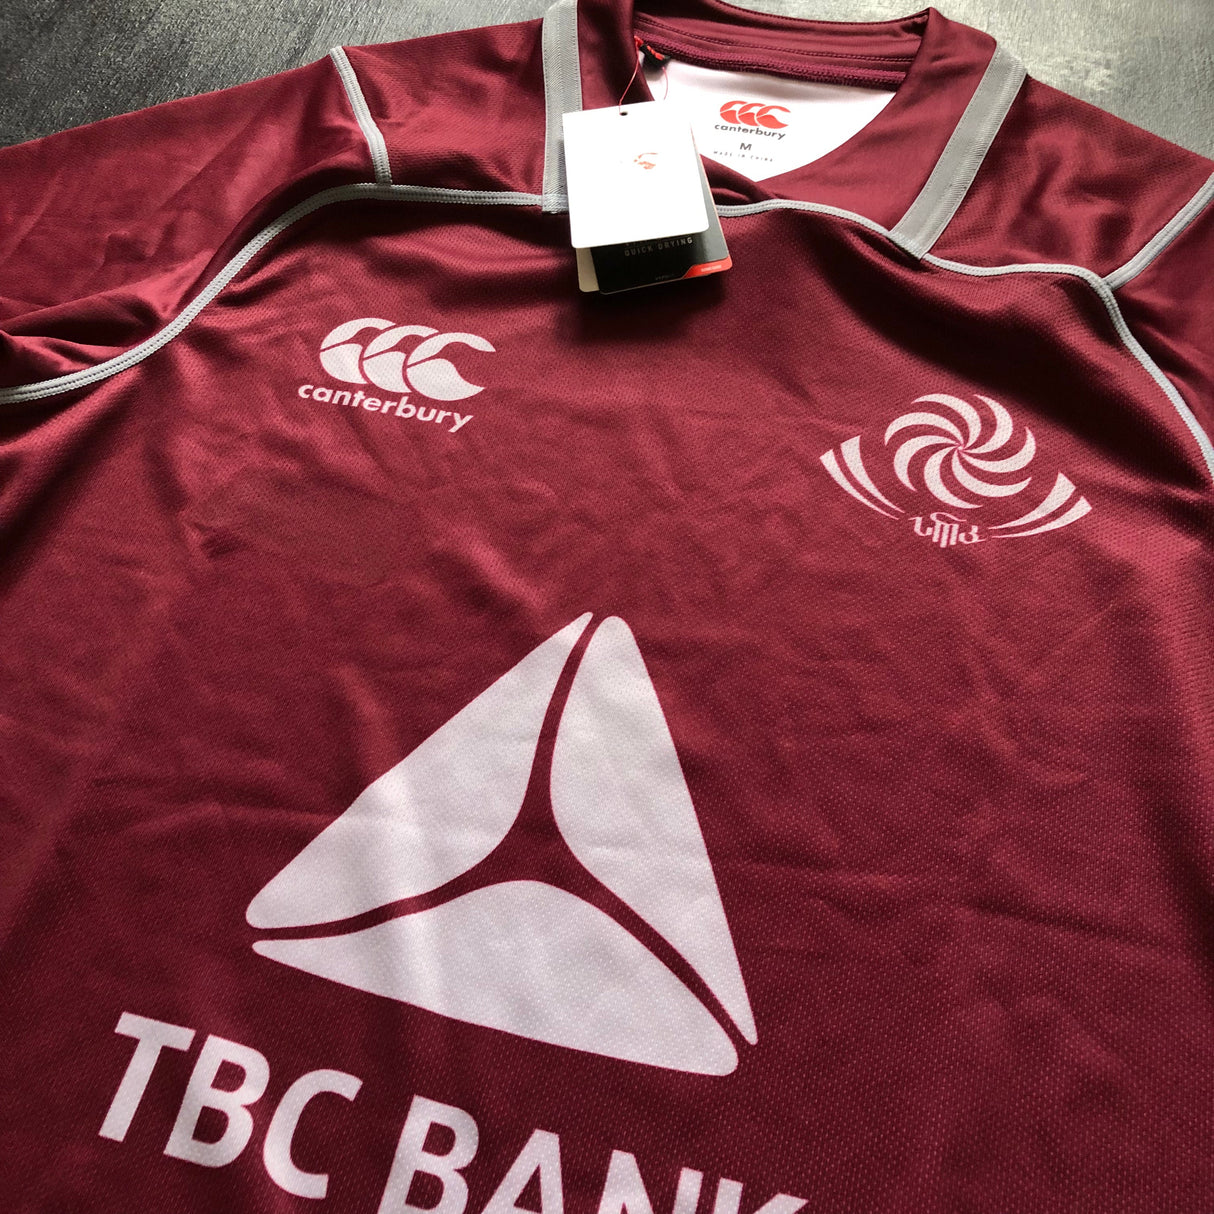 Georgia National Rugby Team Jersey 2018/19 Medium BNWT (Defect) Underdog Rugby - The Tier 2 Rugby Shop 